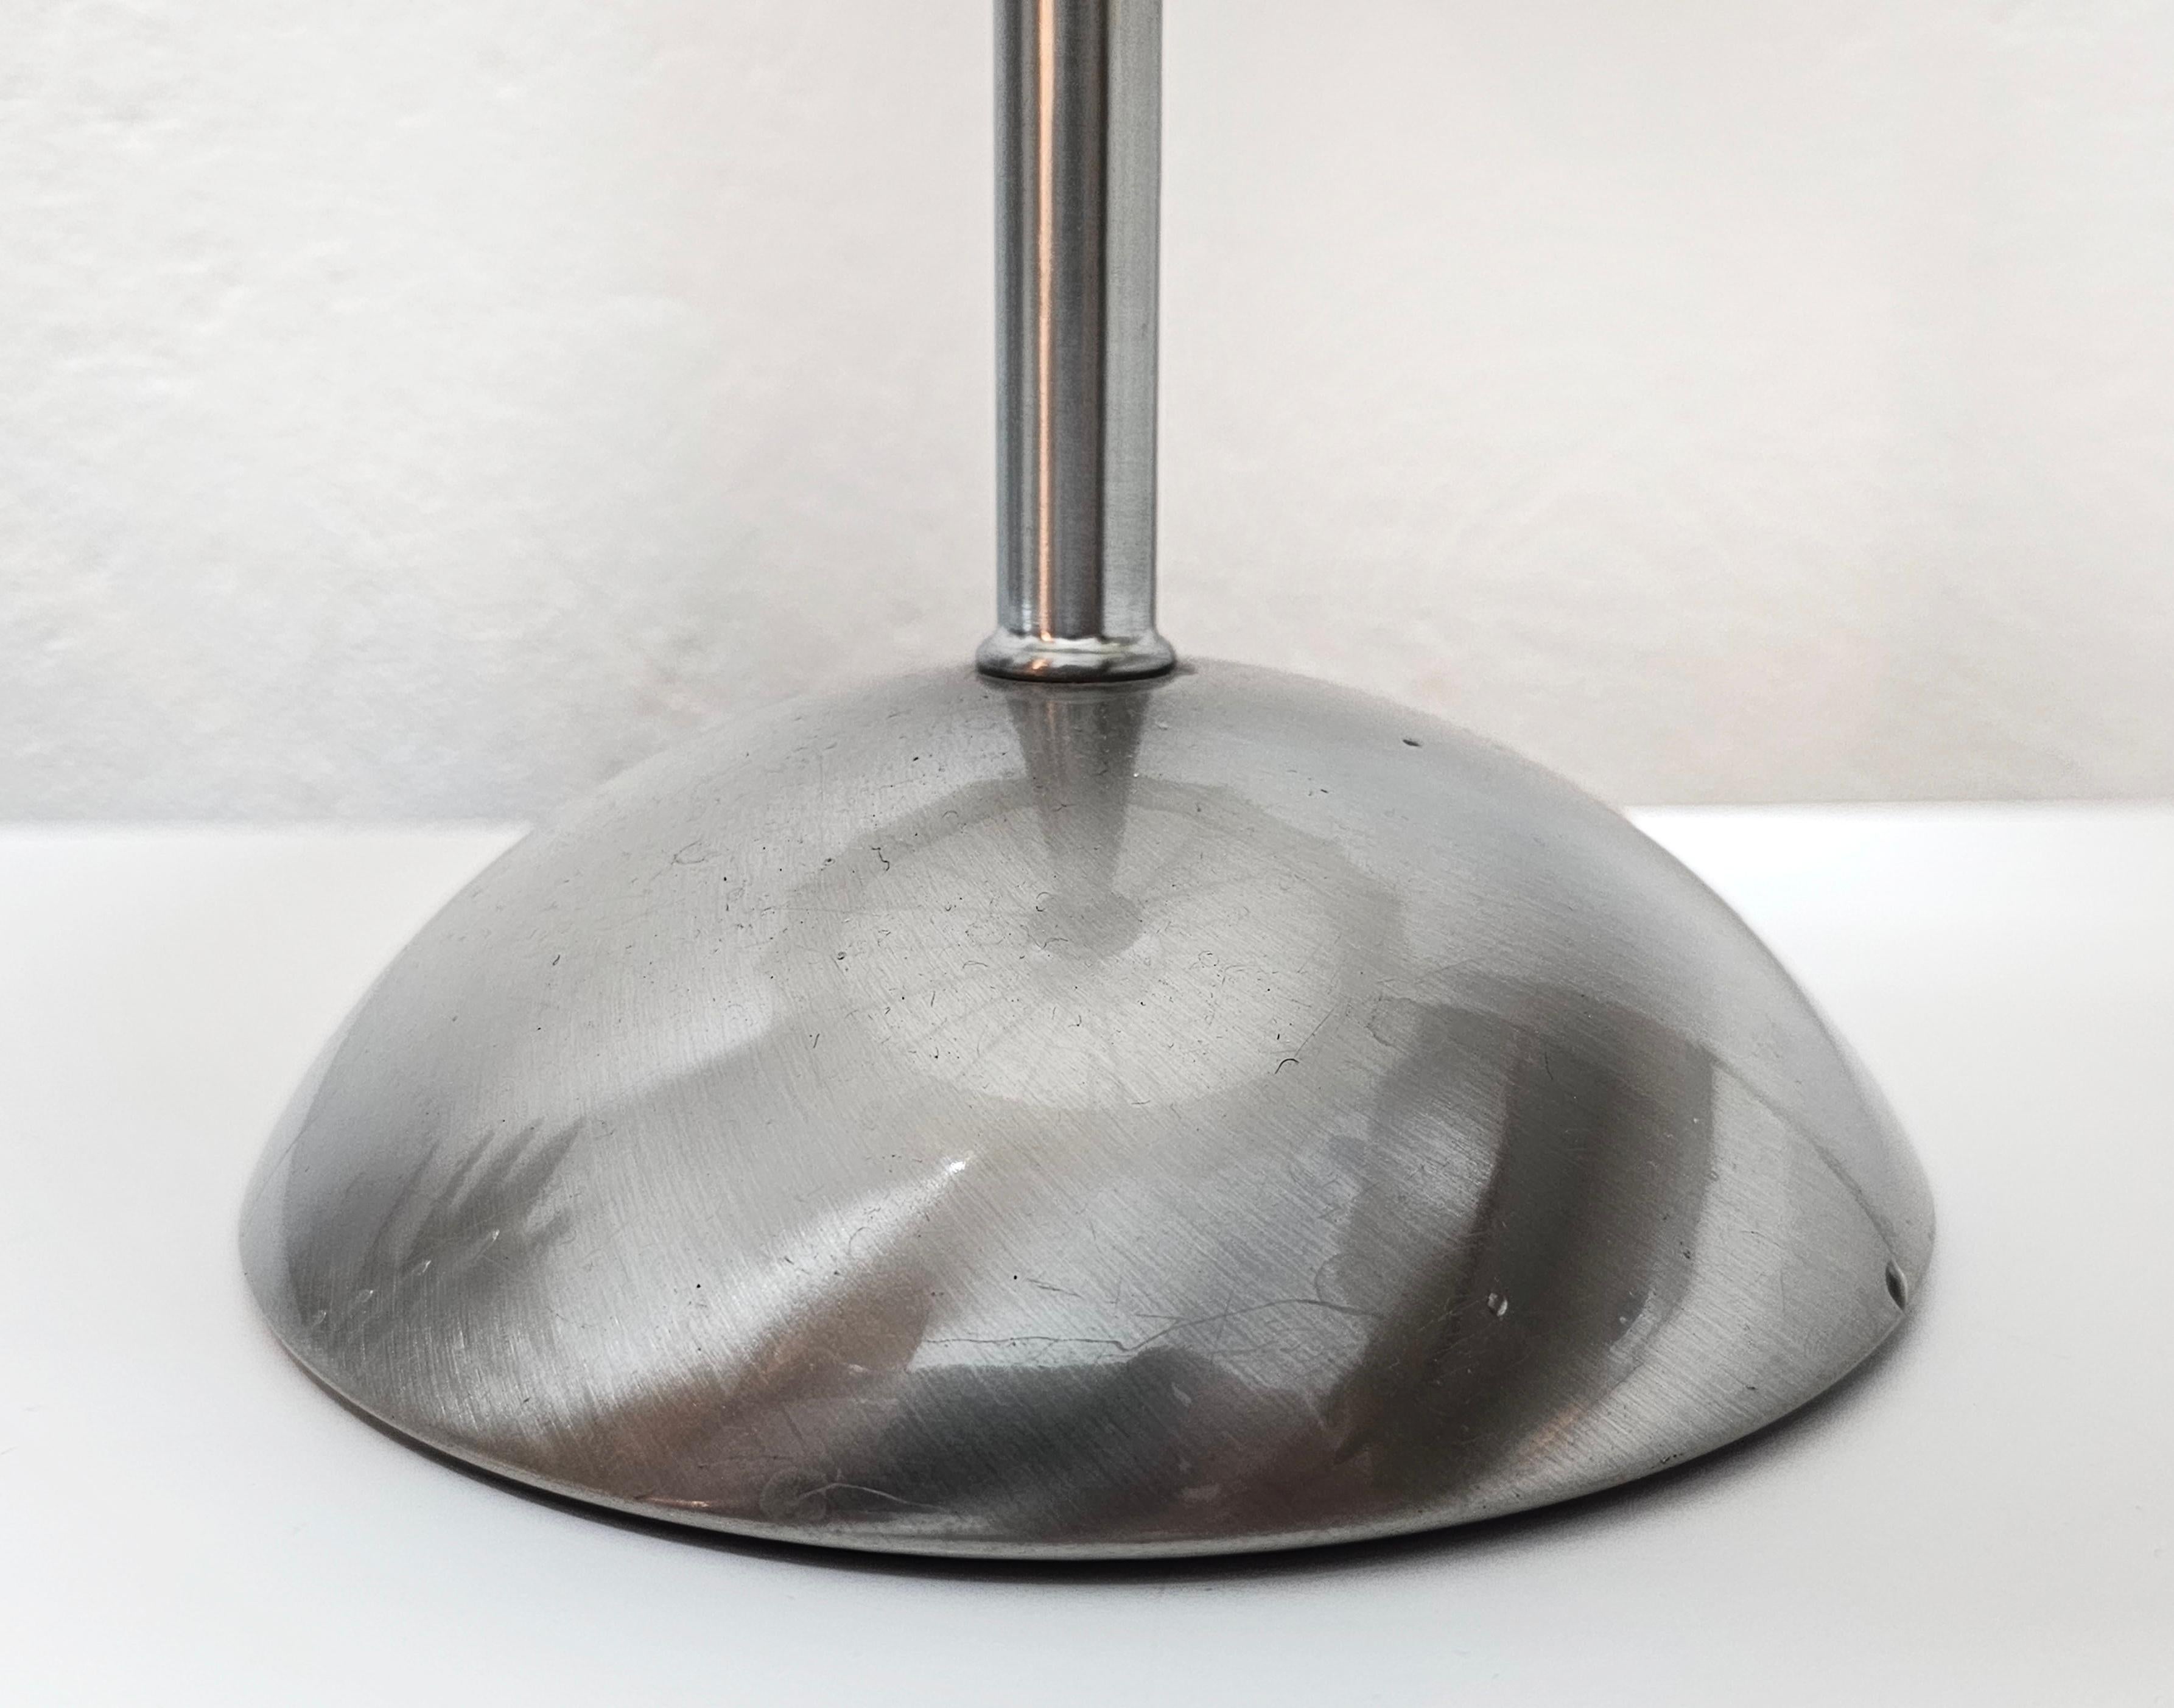 Mid Century Modern Cocoon Table Lamp in style of Achille Castiglioni, Italy 1970 For Sale 3